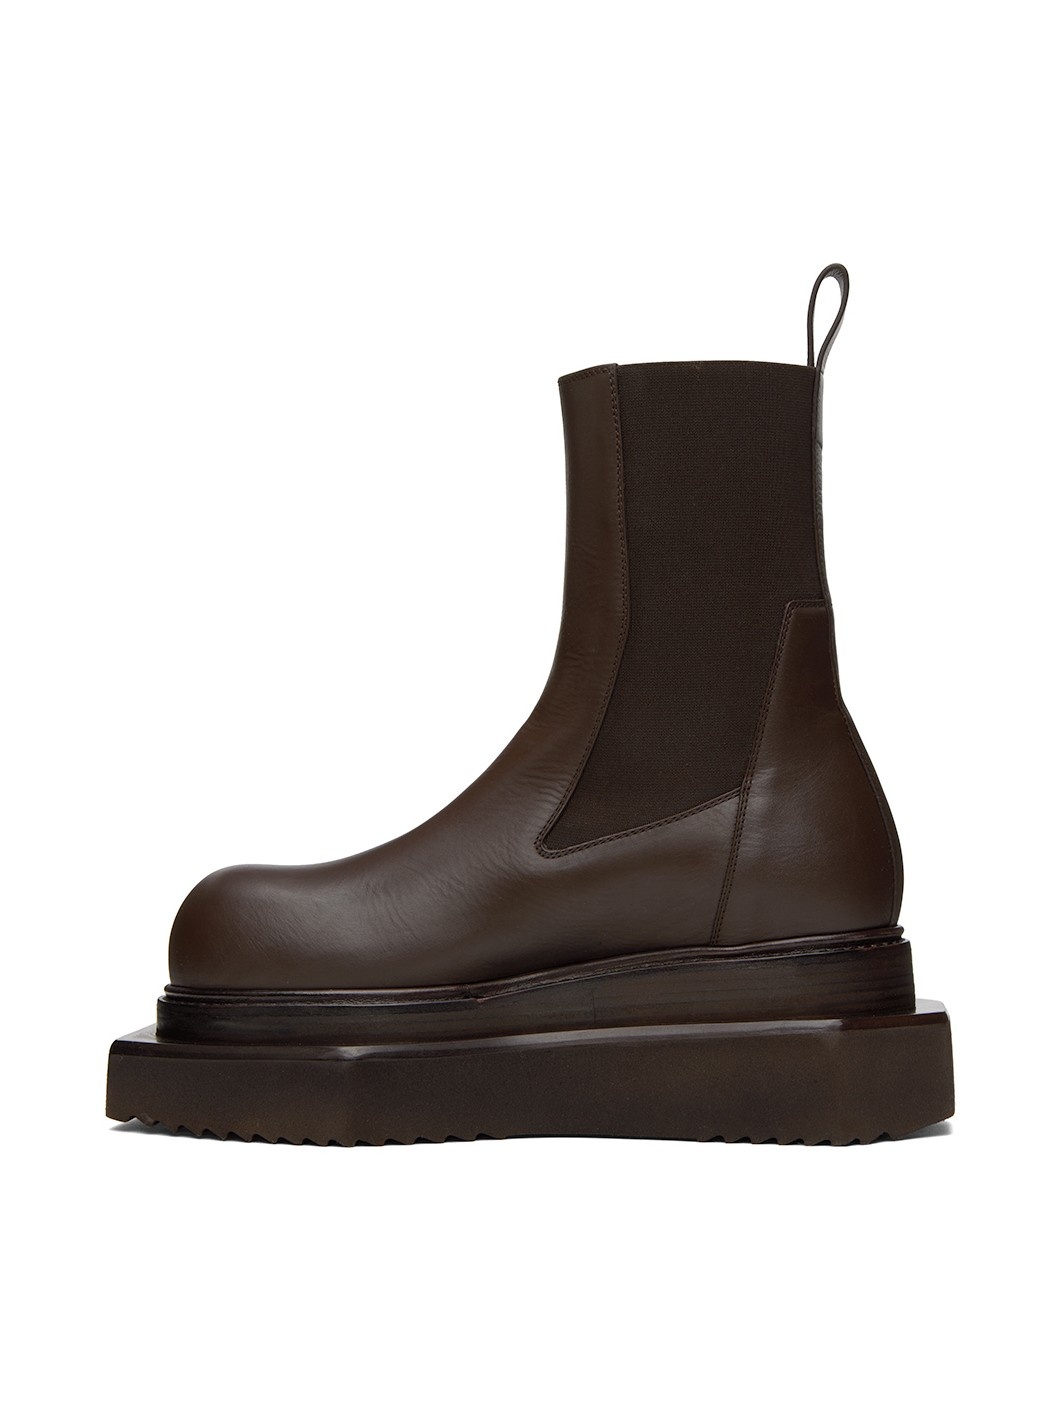 Brown Beatle Turbo Cyclops Boots - 3